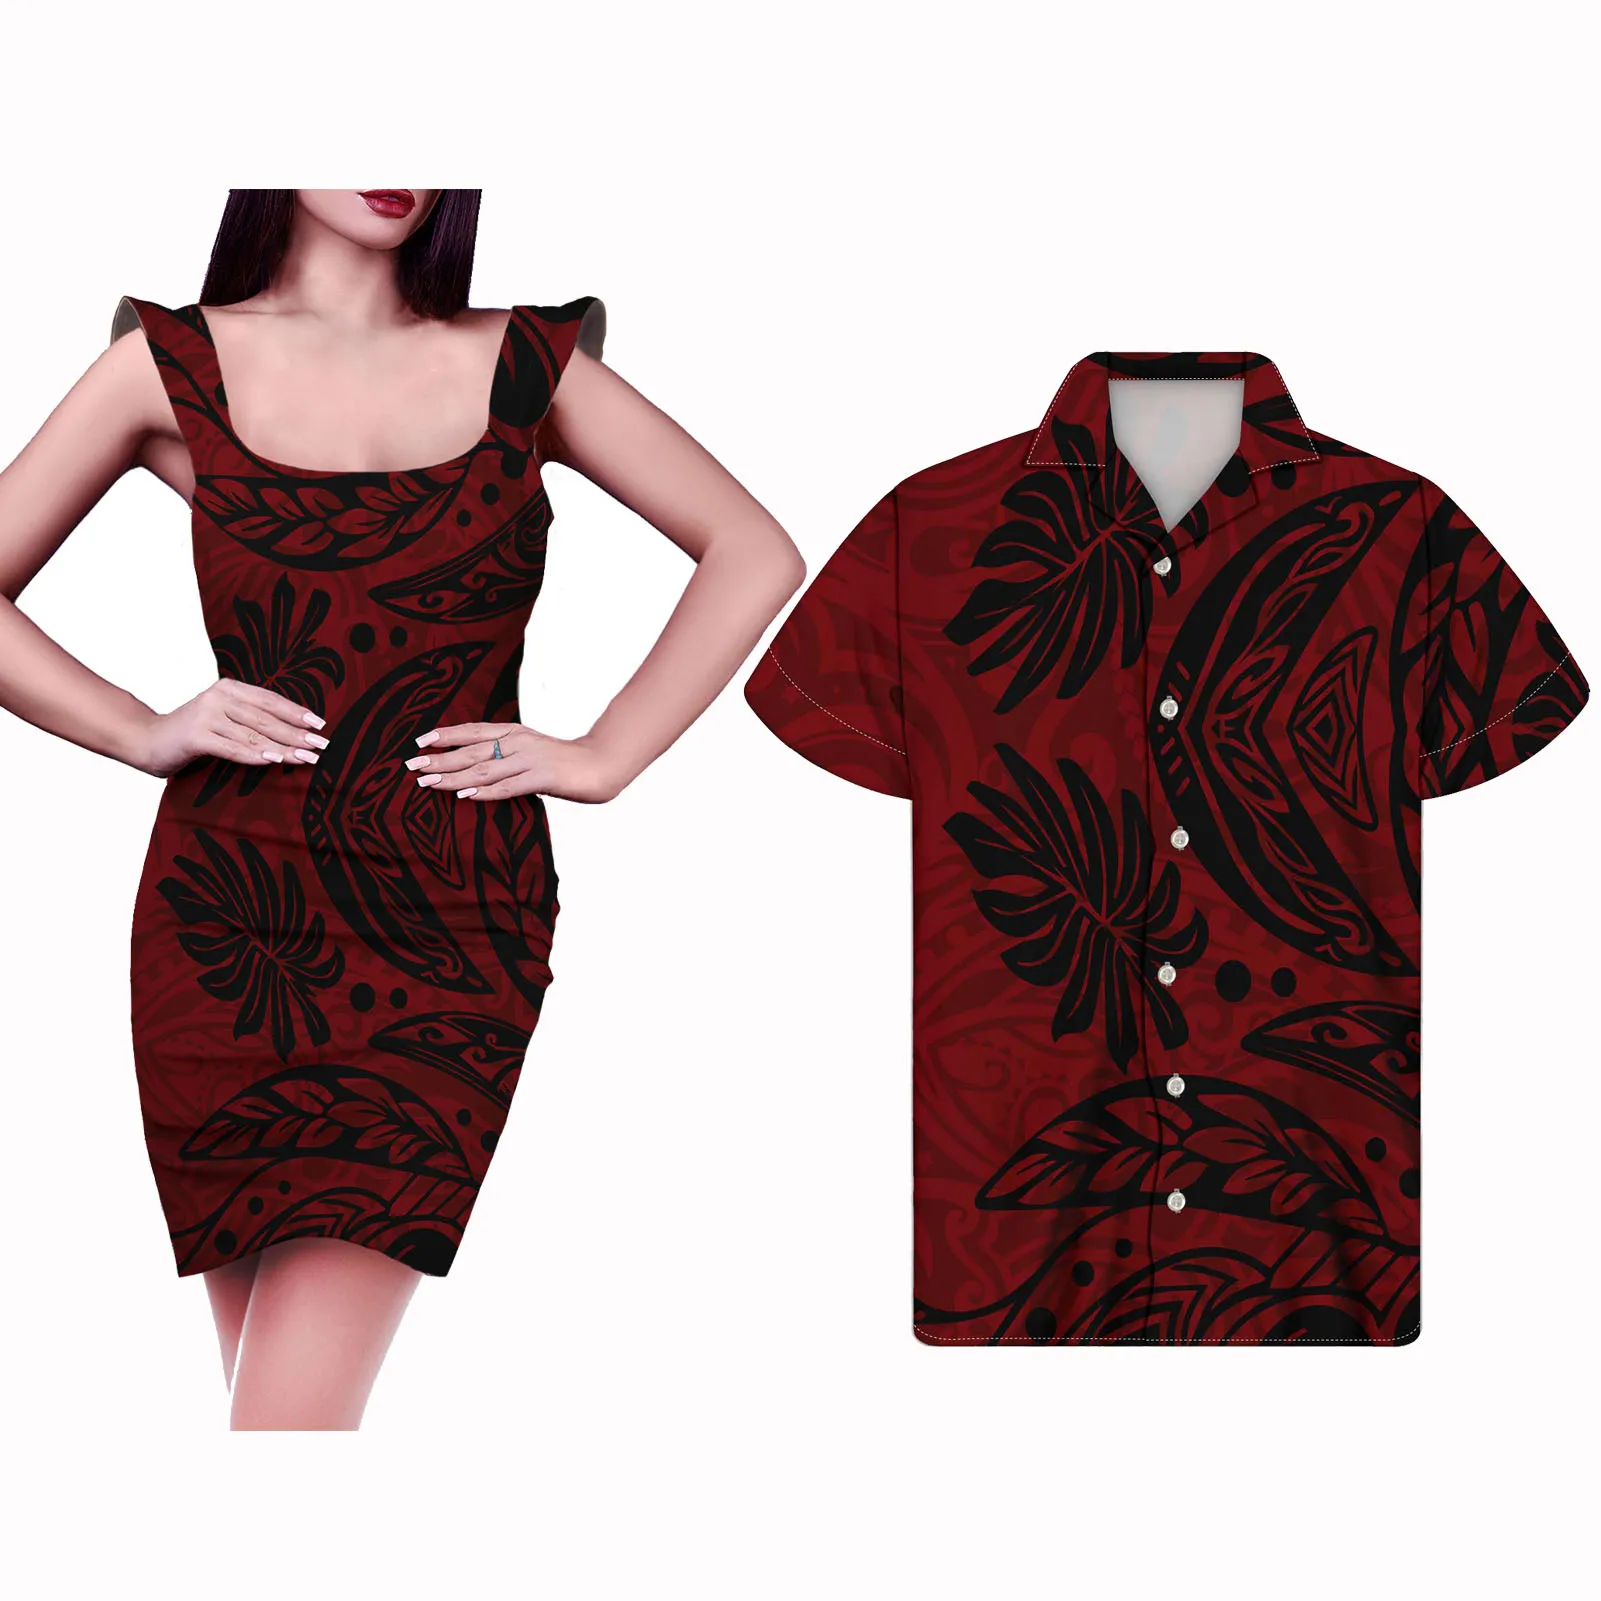 

Hycool Clothes For Women Leaves Polynesian Tribal Print Dresses For Women Party Hawaii Shirt Fashion Couple Outfit Clothes